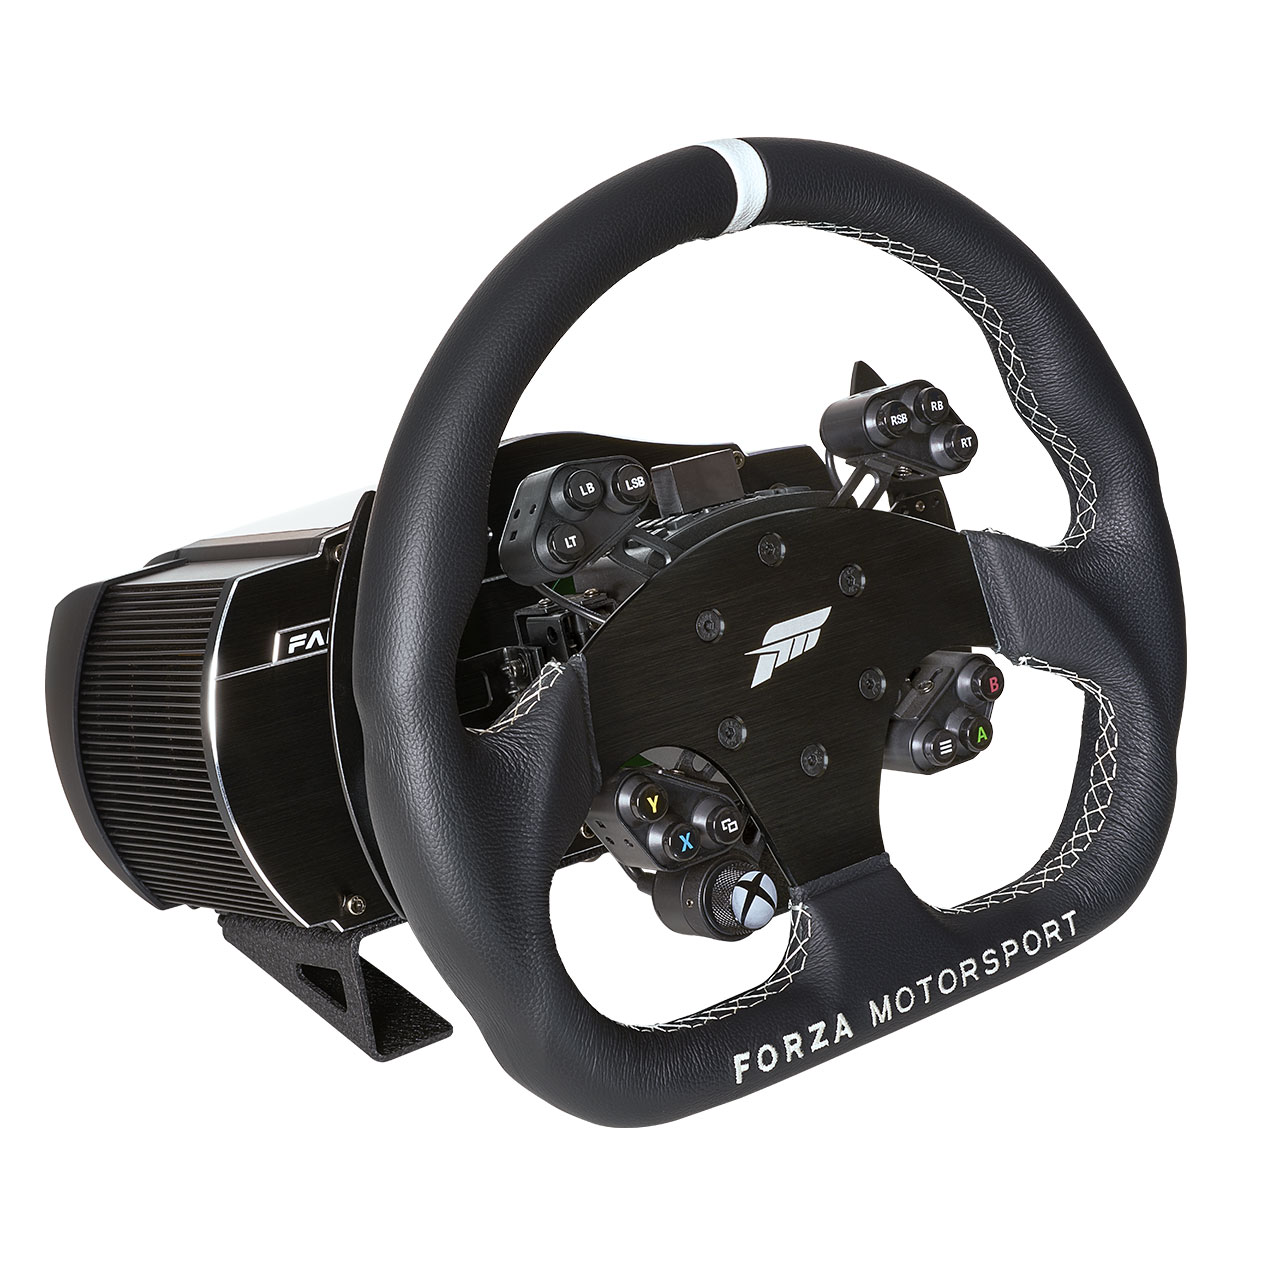 ClubSport Racing Wheel V2.5 GT Forza Motorsport for Xbox One